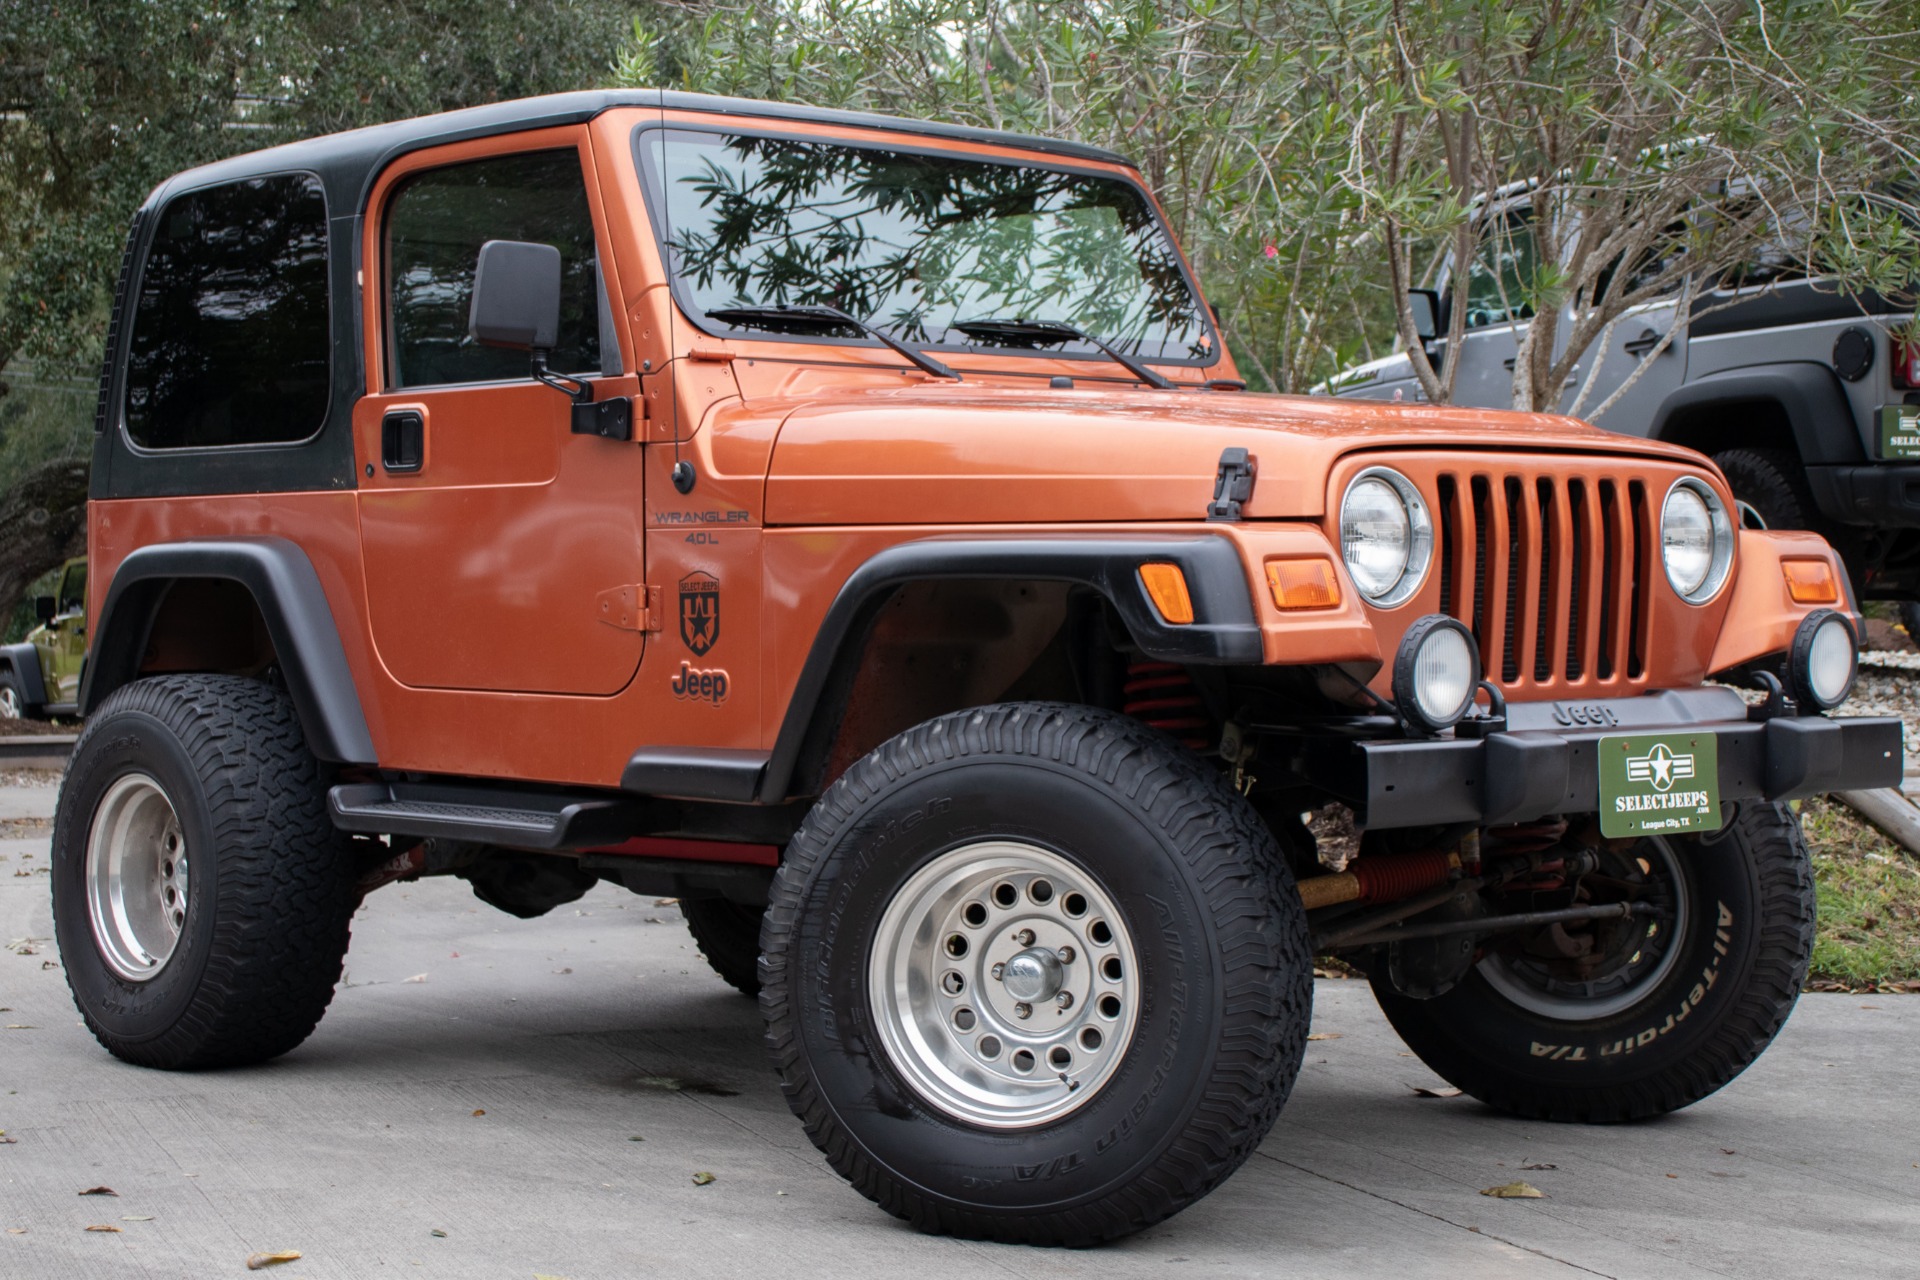 Used 2001 Jeep Wrangler Sport For Sale ($12,995) | Select Jeeps Inc. Stock  #328322